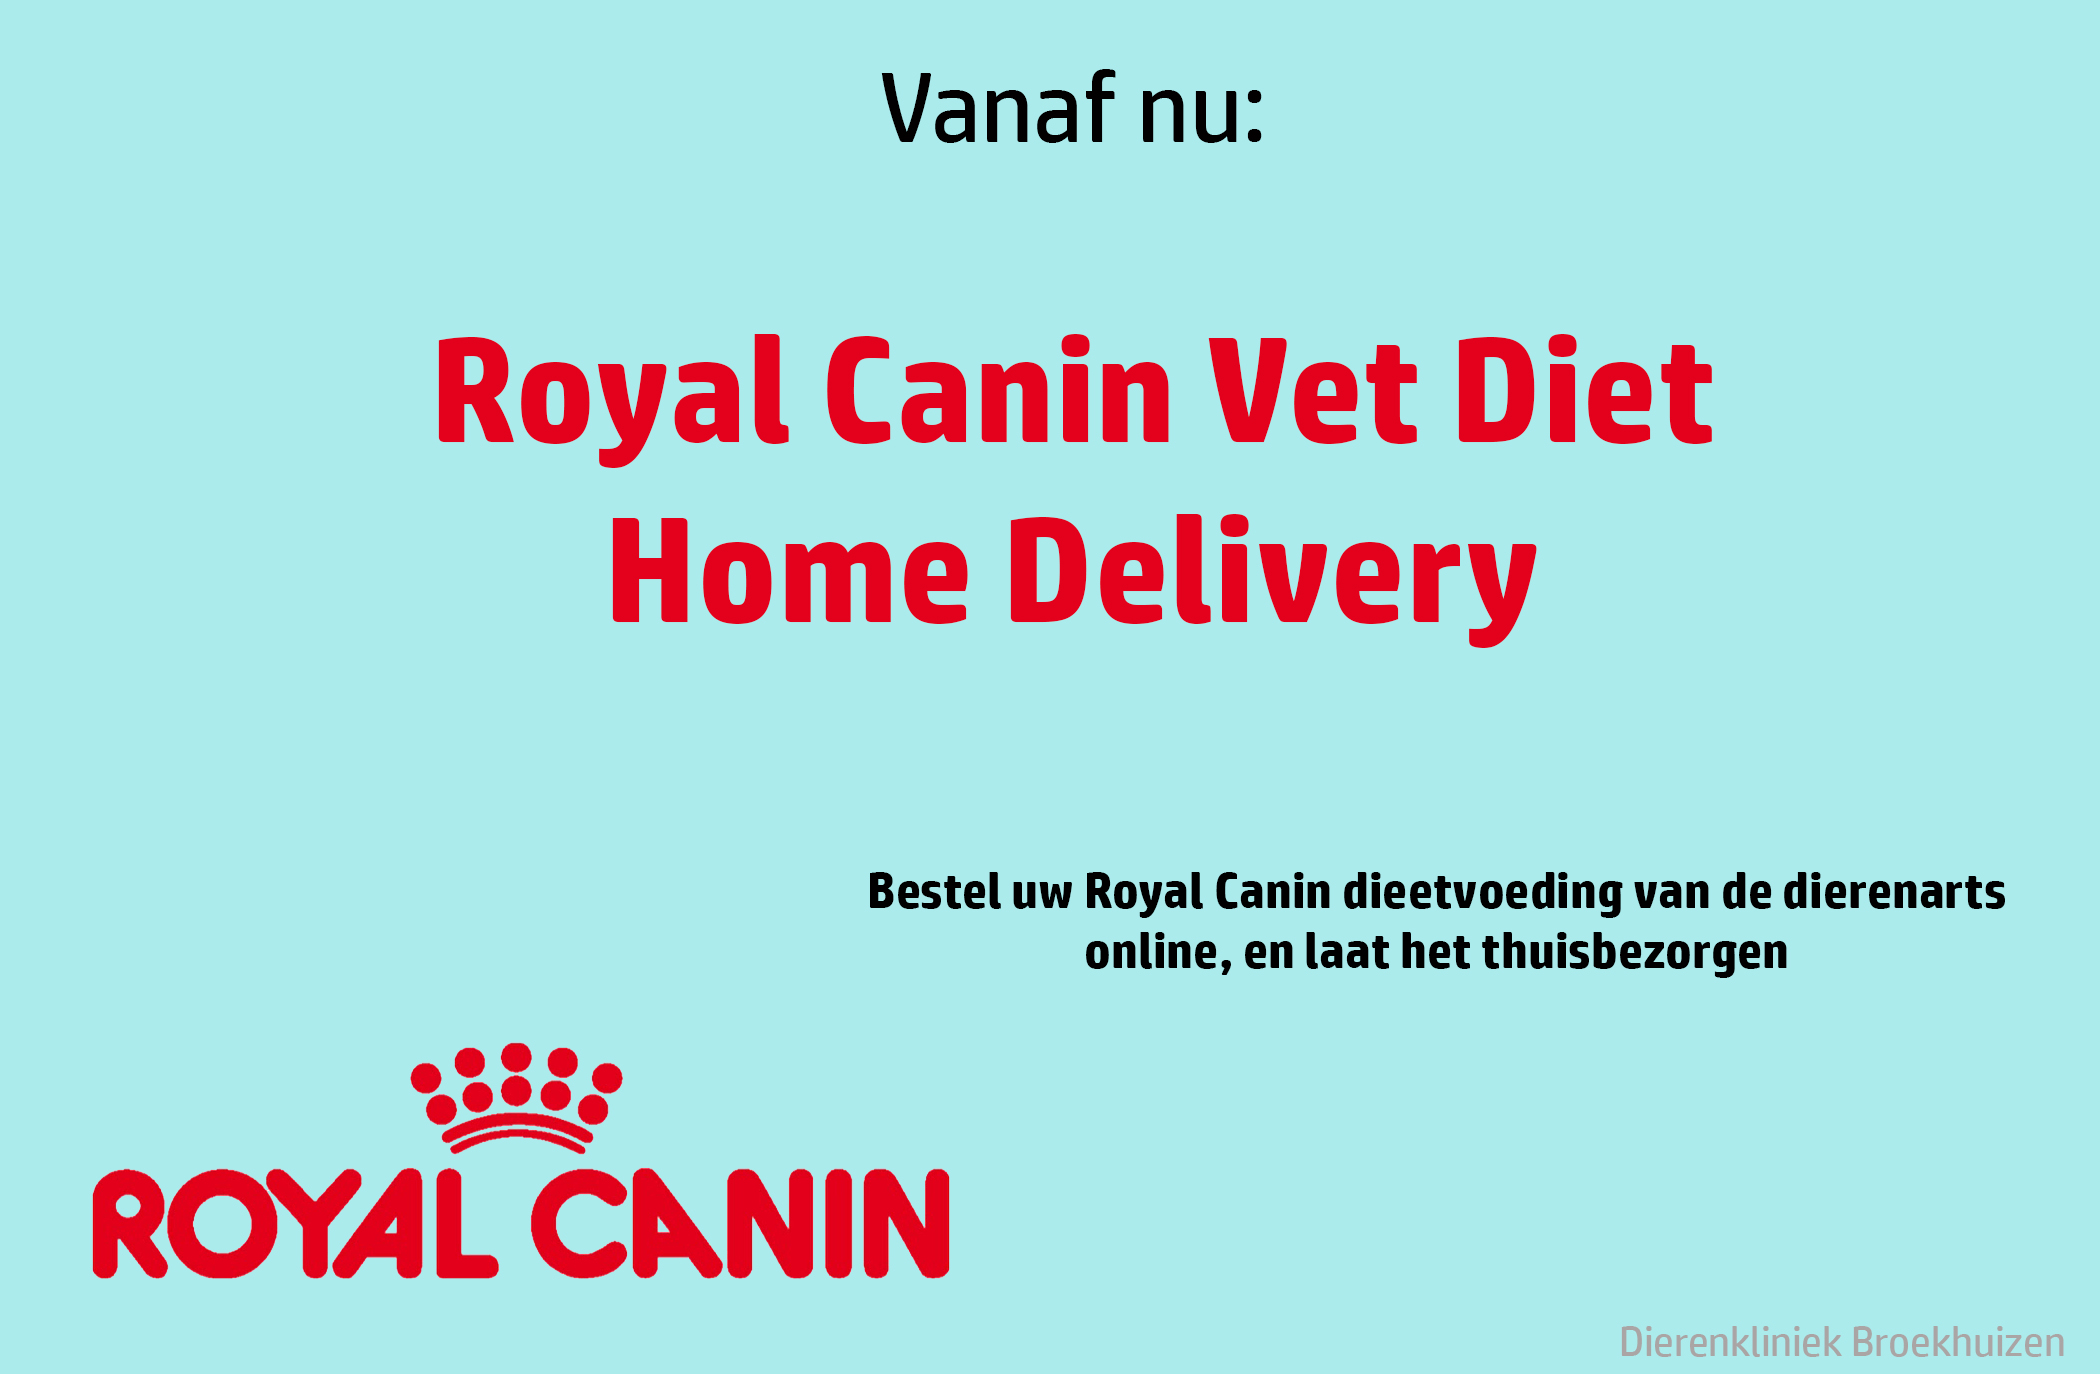 royal canin vet diet home delivery